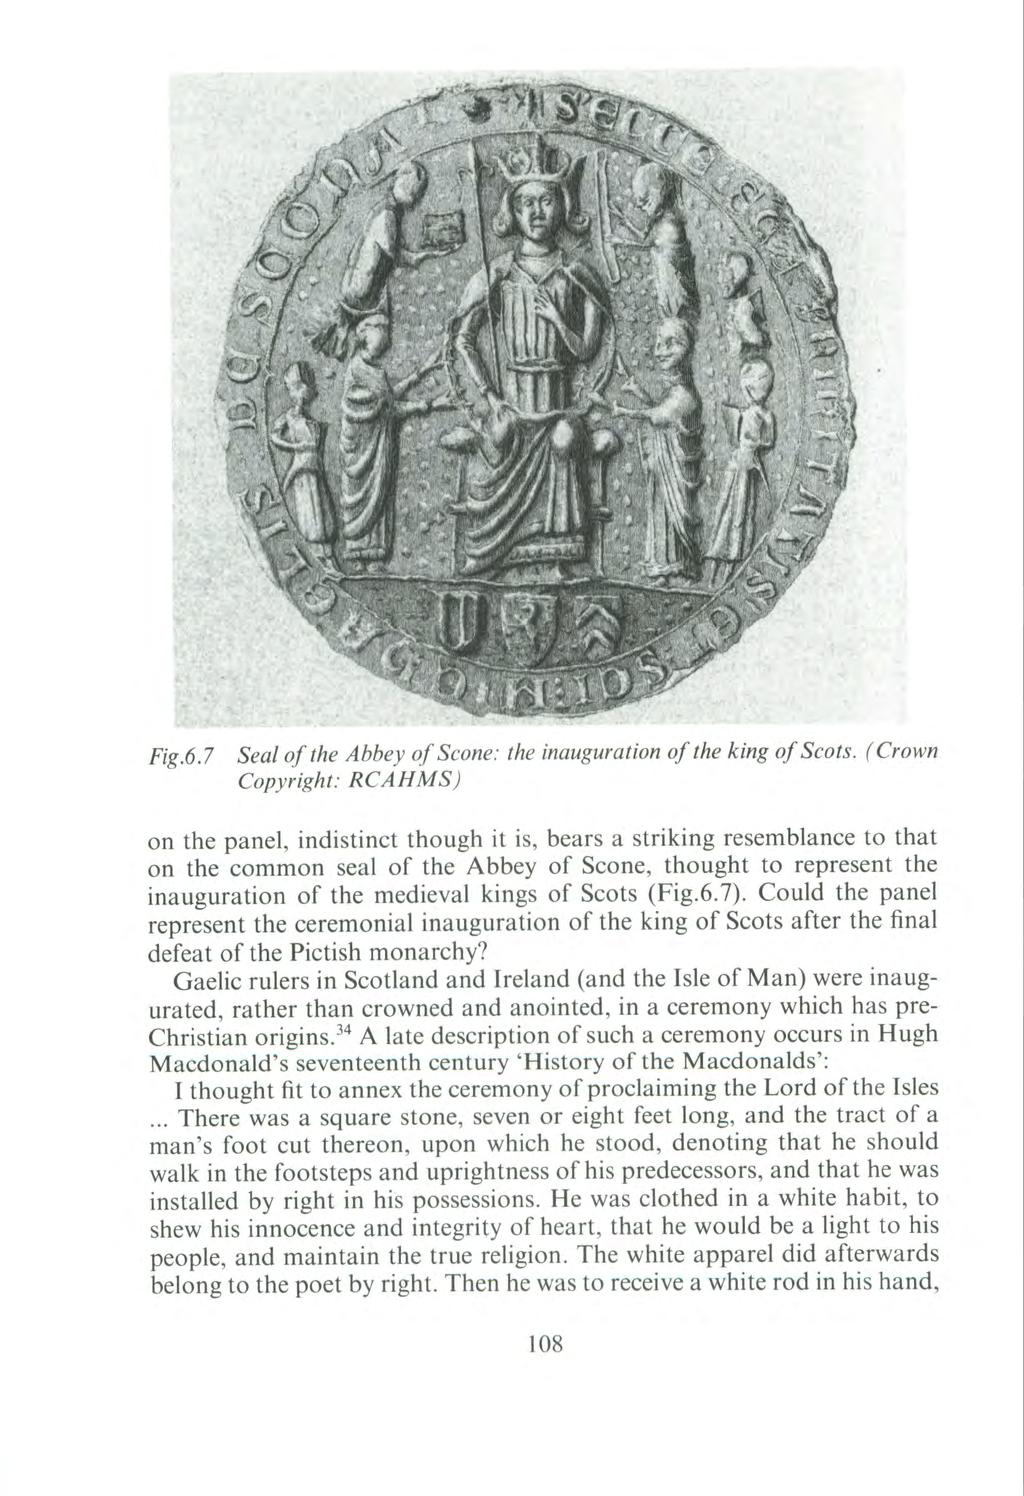 Fig.6.7 Seal of the Abbey of Scone: the inauguration of the king of Scots.